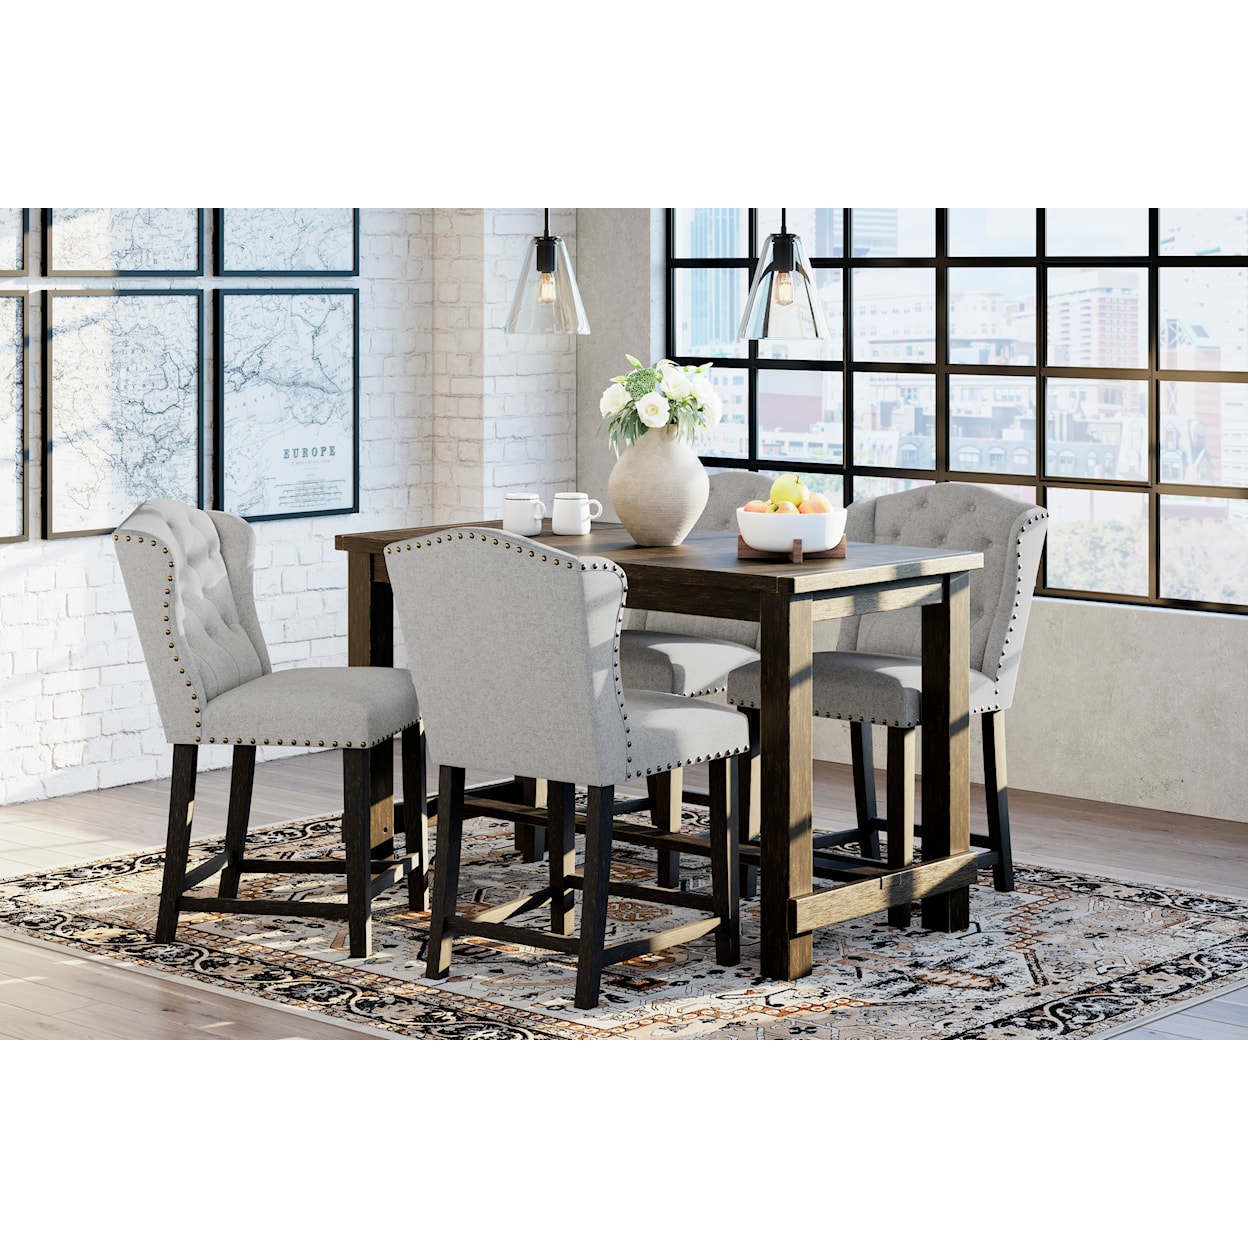 Ashley Furniture Signature Design Jeanette Counter Height Bar Stool